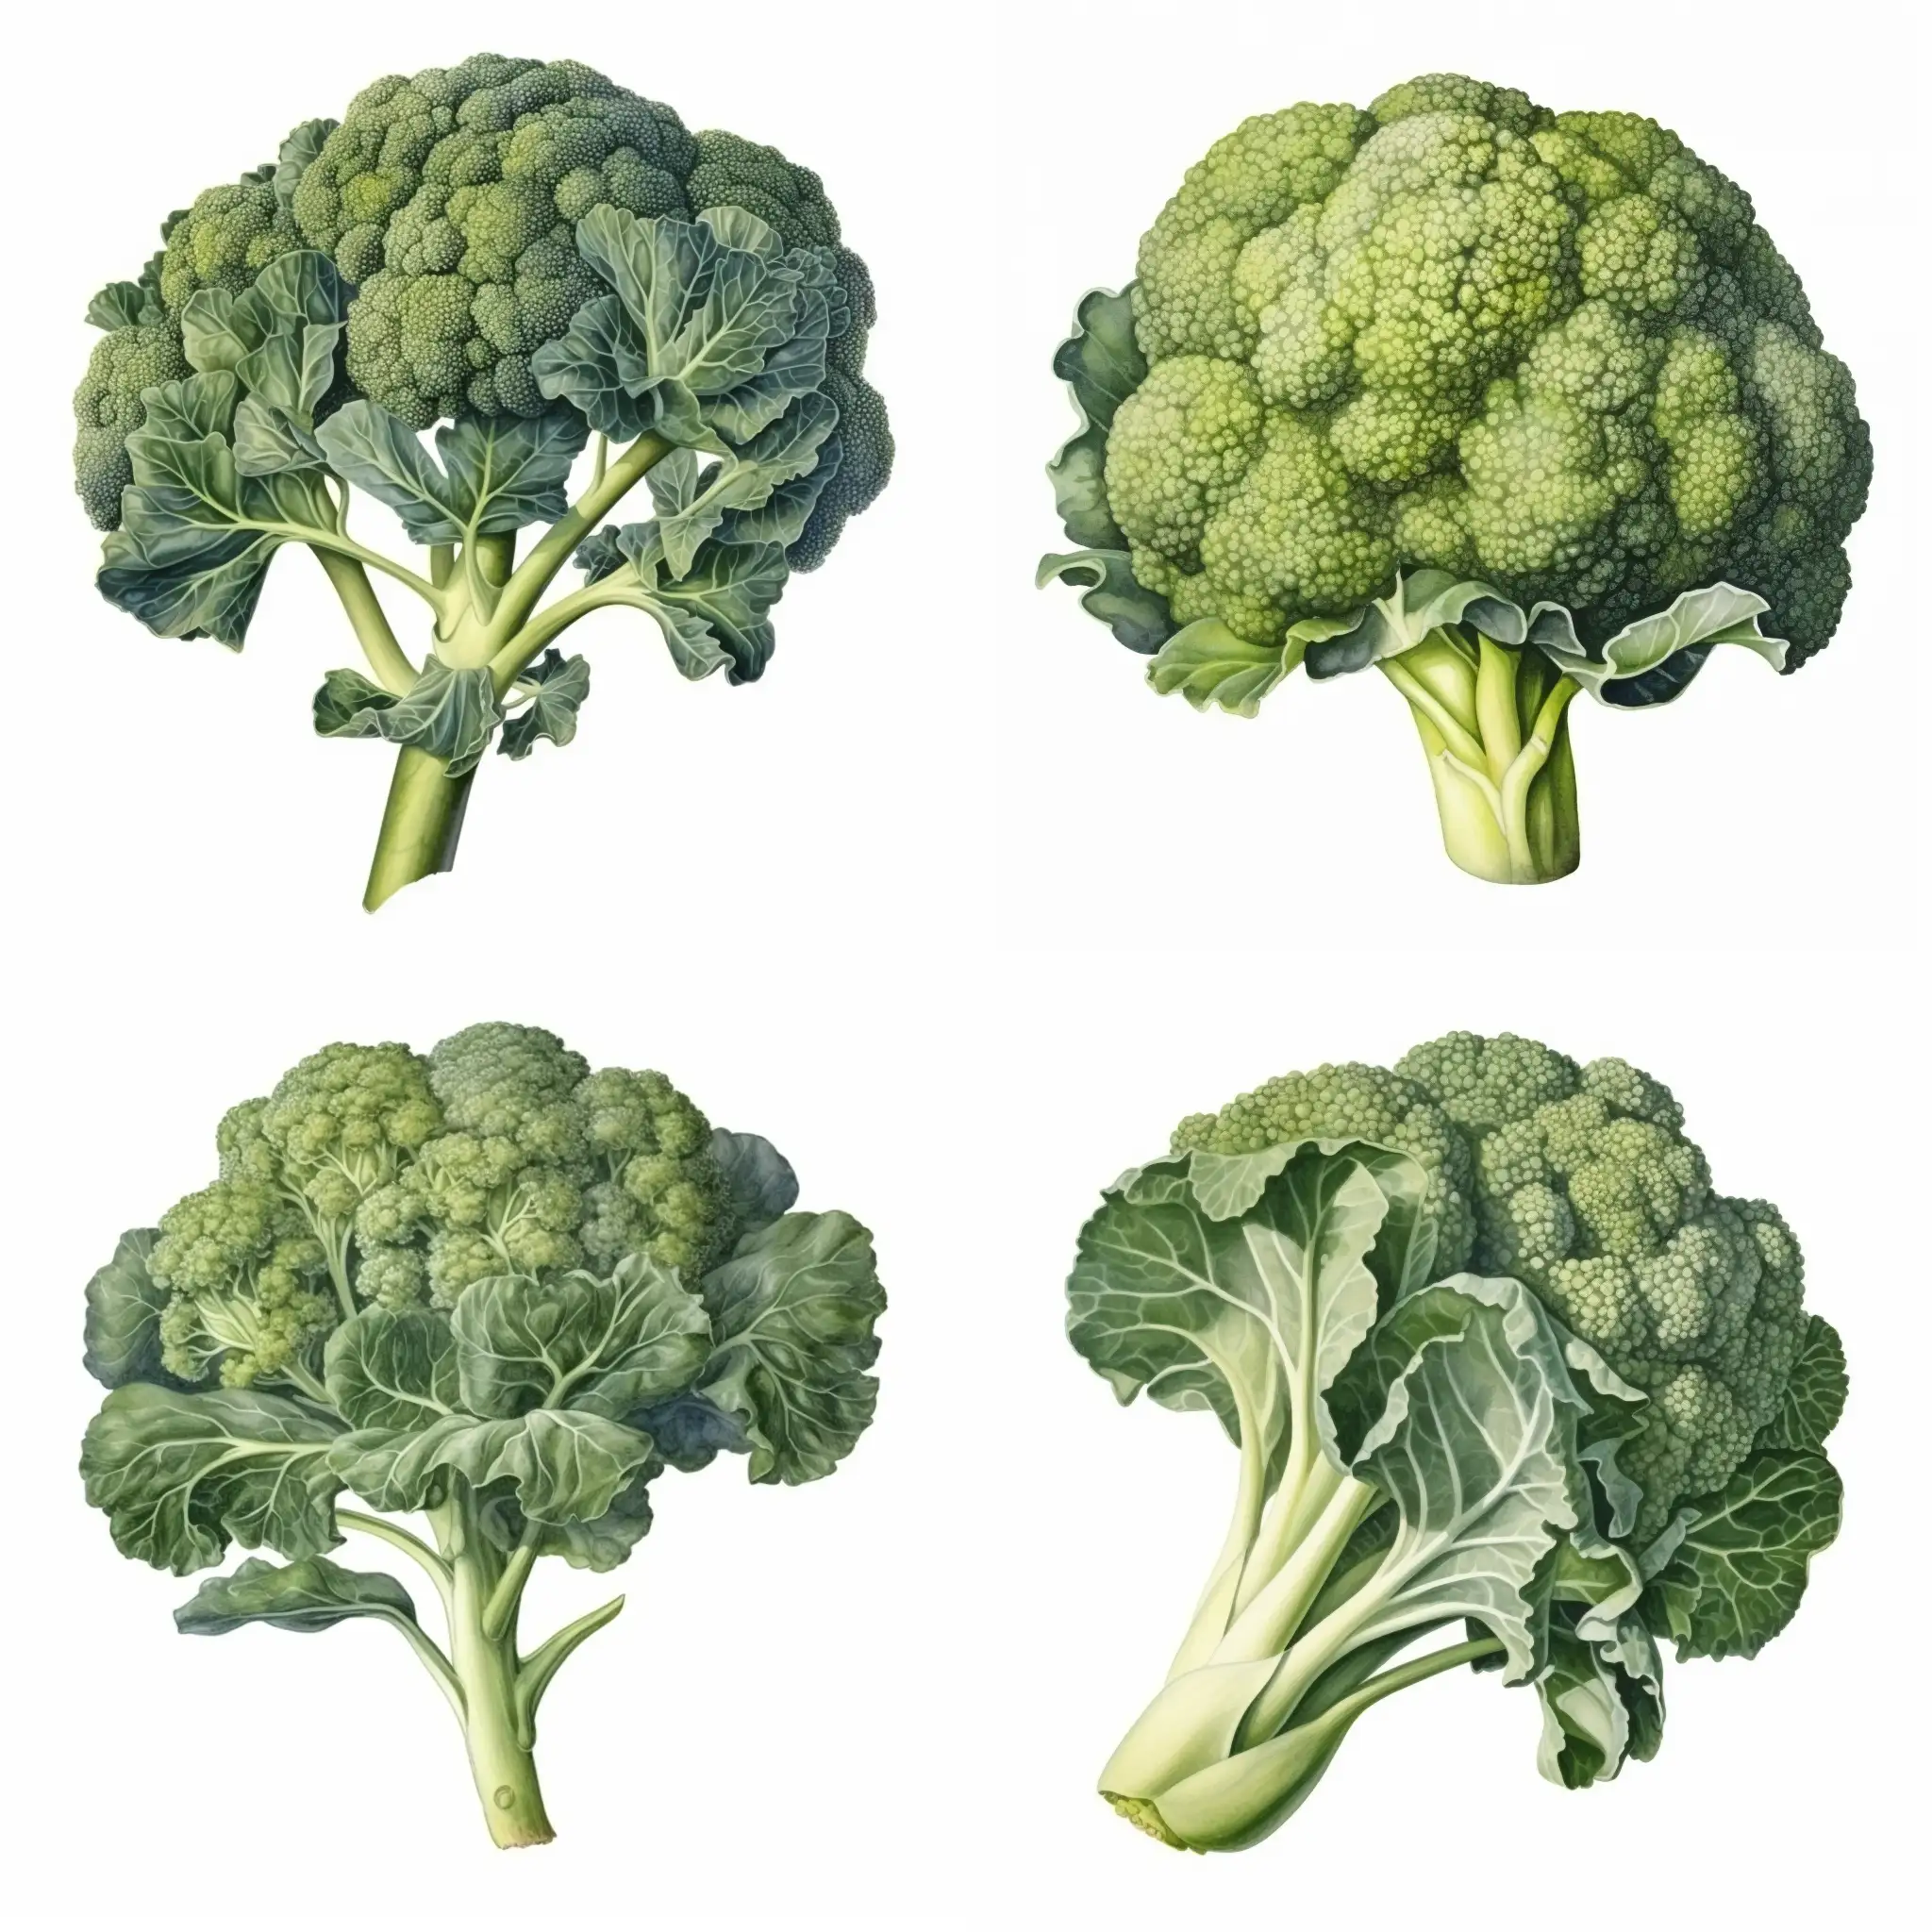 Watercolor broccoli illustration isolated on white background